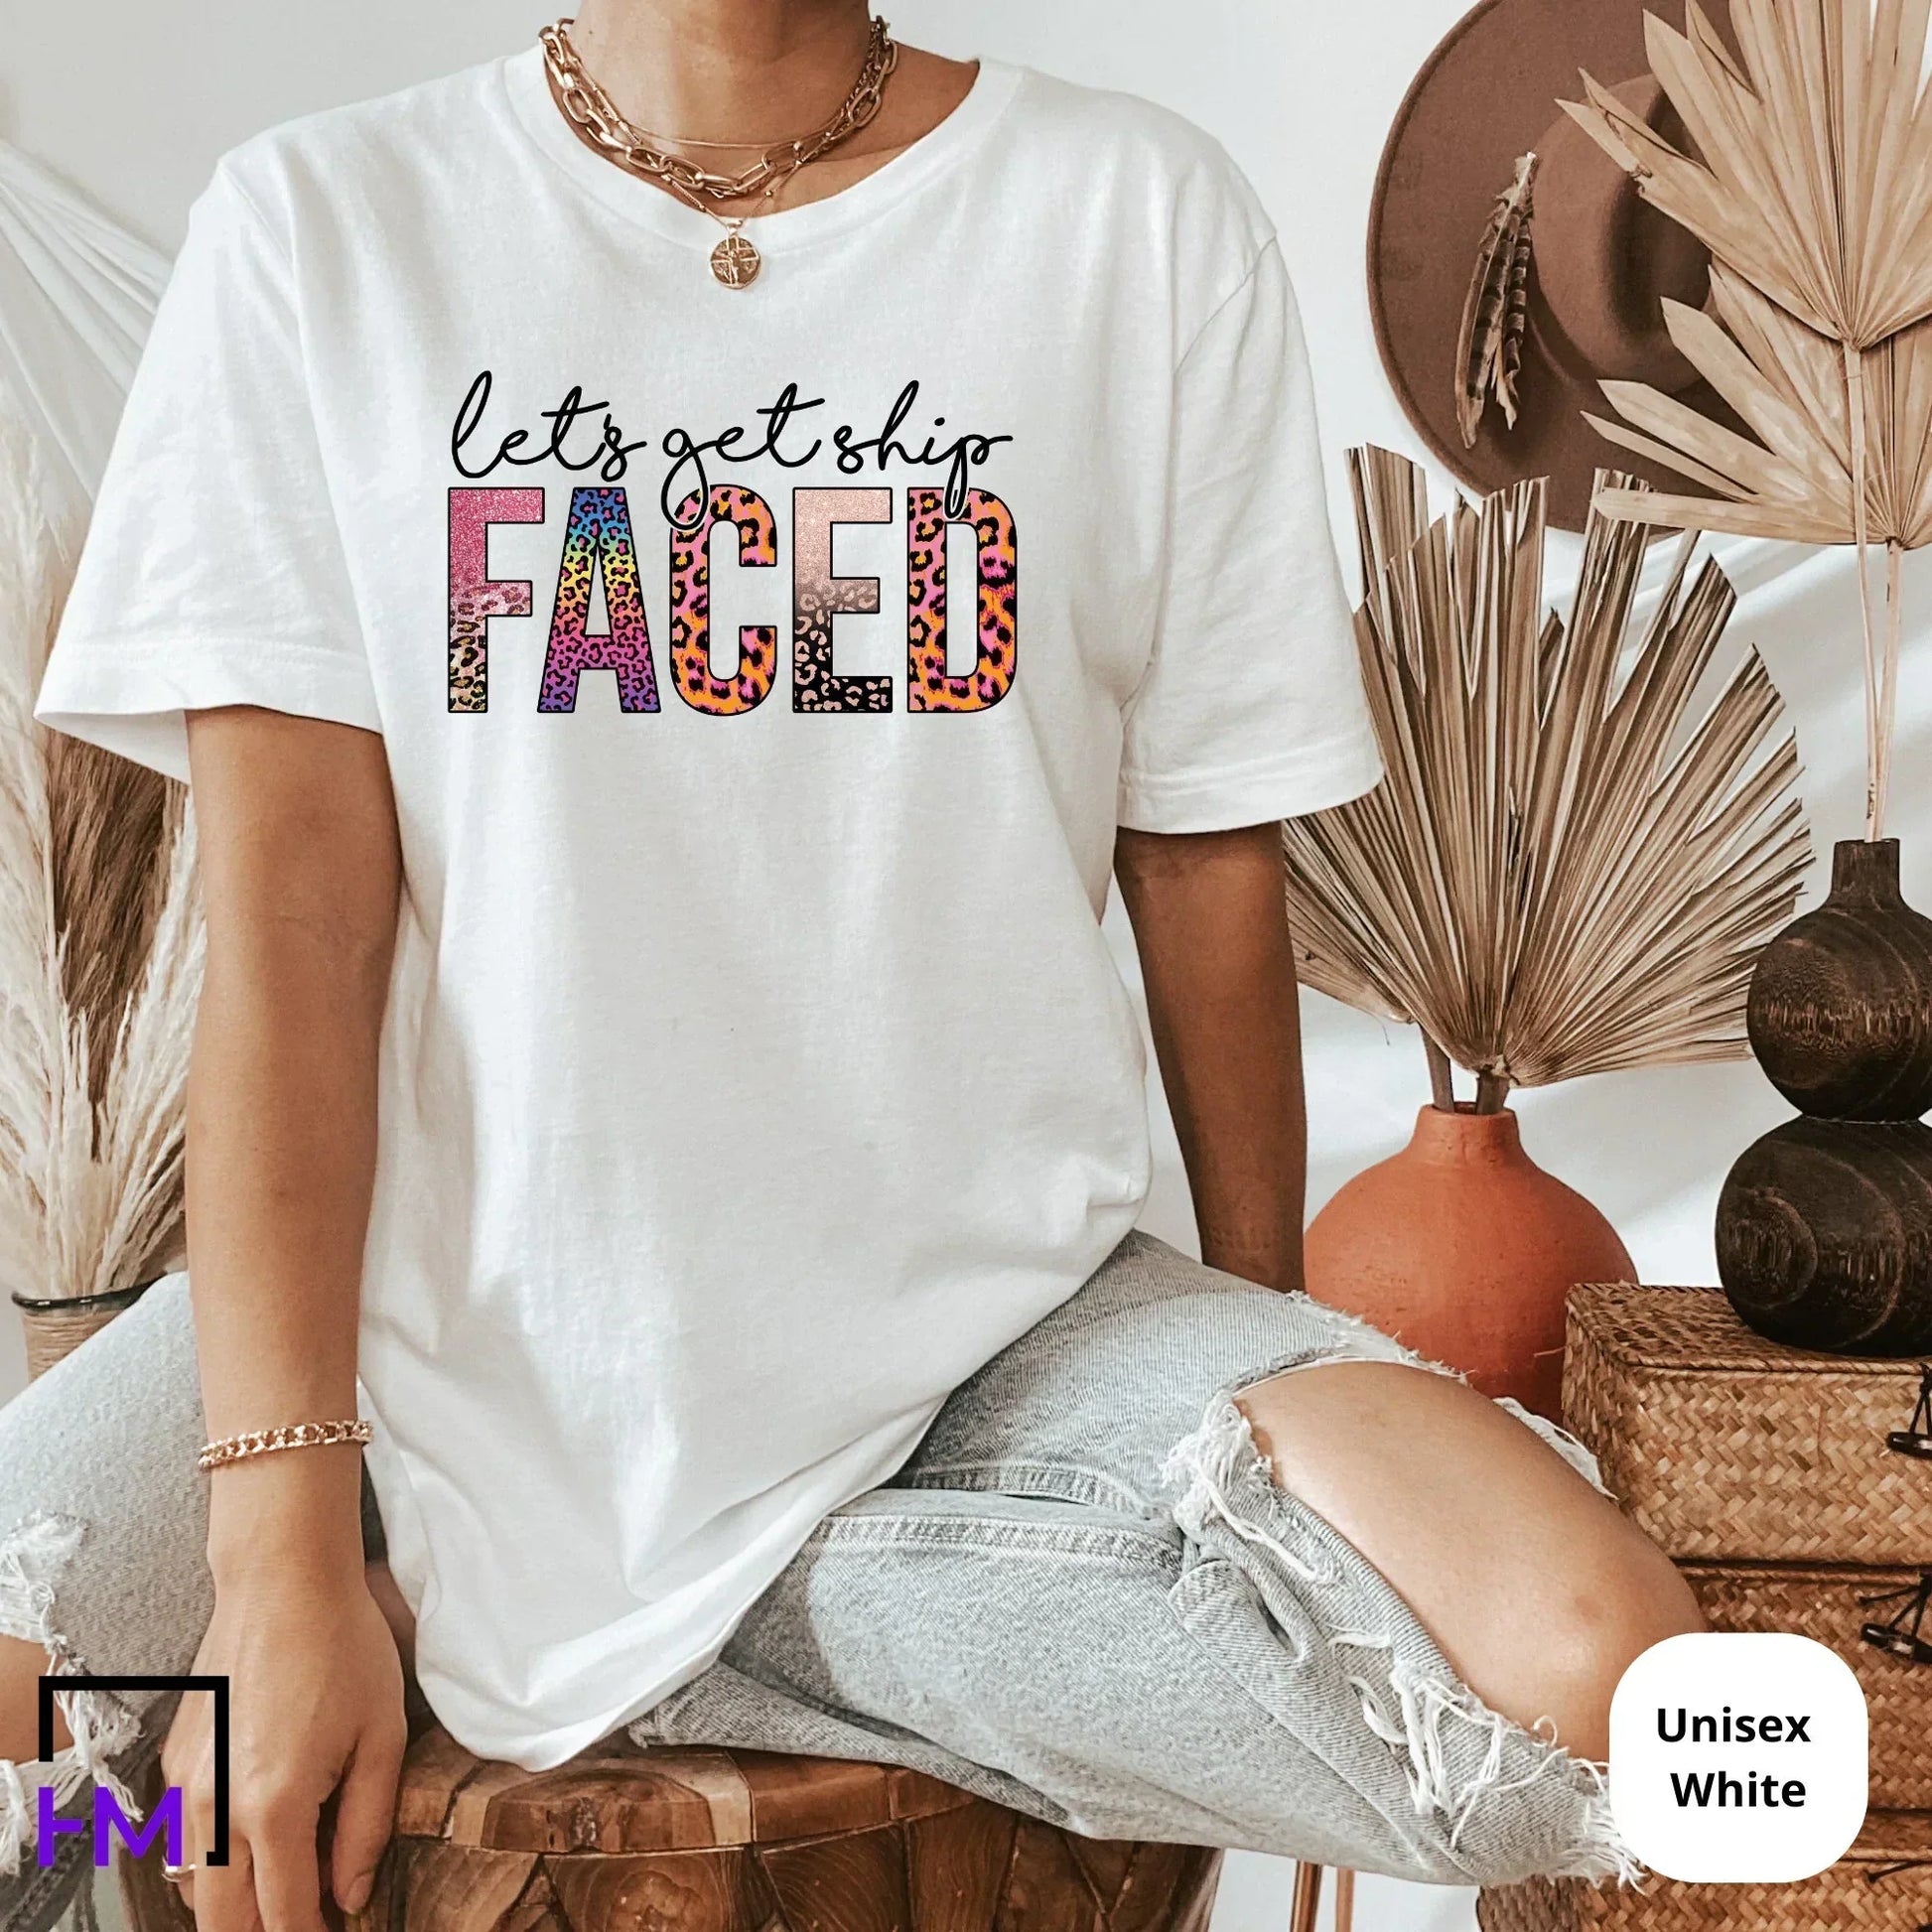 Let's Get Ship Faced, Funny Cruise Shirts for Women HMDesignStudioUS